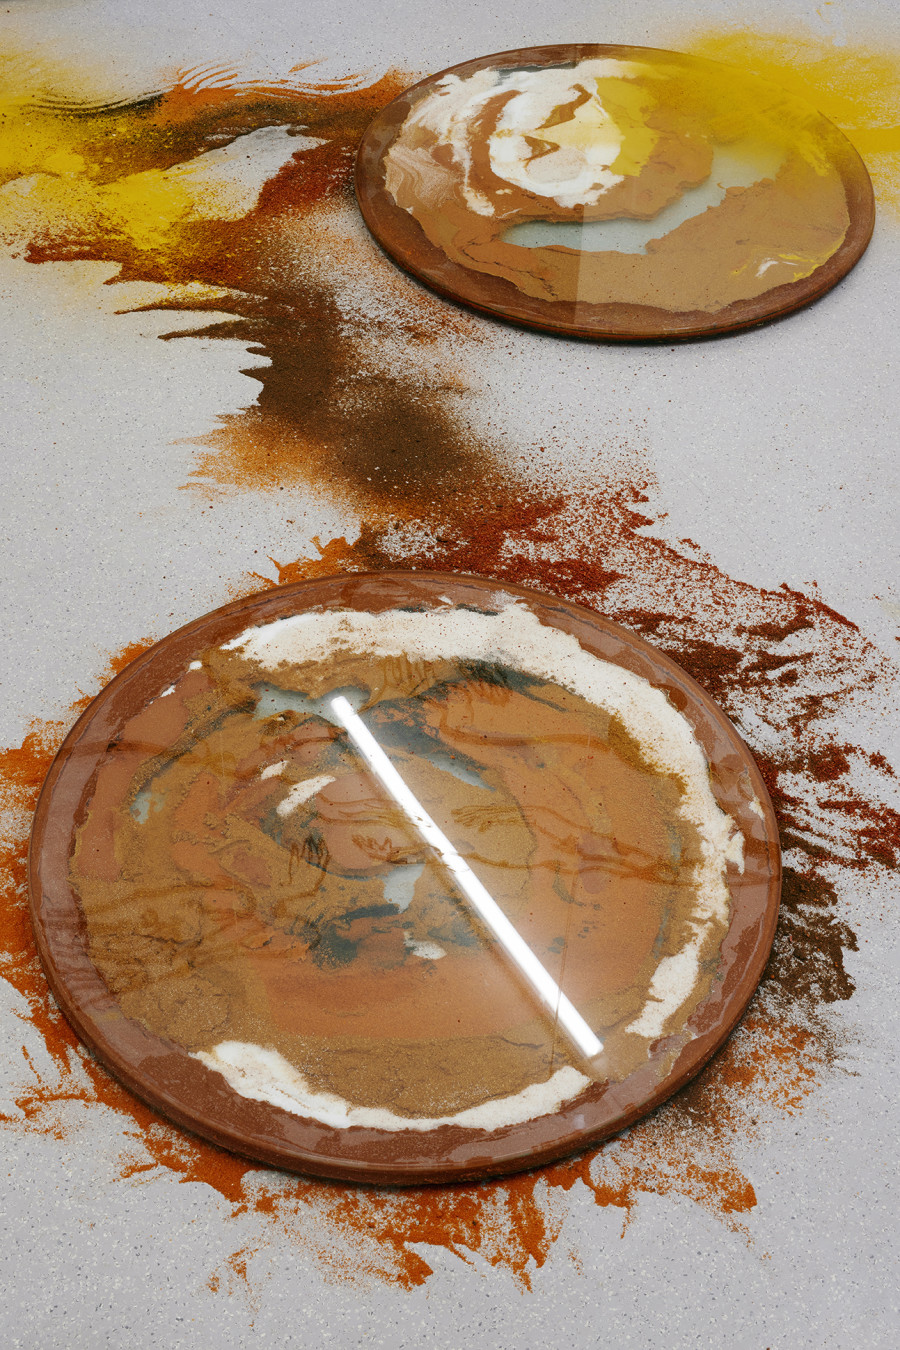 Monia Ben Hamouda, The Luncay of Lunar Sightings (Hourglasses VIII & IX), 2022, Glass, chilli pigmented silicon, spices, 80 x 80 x 3.5 cm, each. Installation view from the solo show The Eye, the Hands, the Lunacy of Lunar Sightings, curated by Anissa Touati, jevouspropose, Zurich, 2022. Courtesy of the artist and ChertLüdde, Berlin, photo: Hannes Heinzer